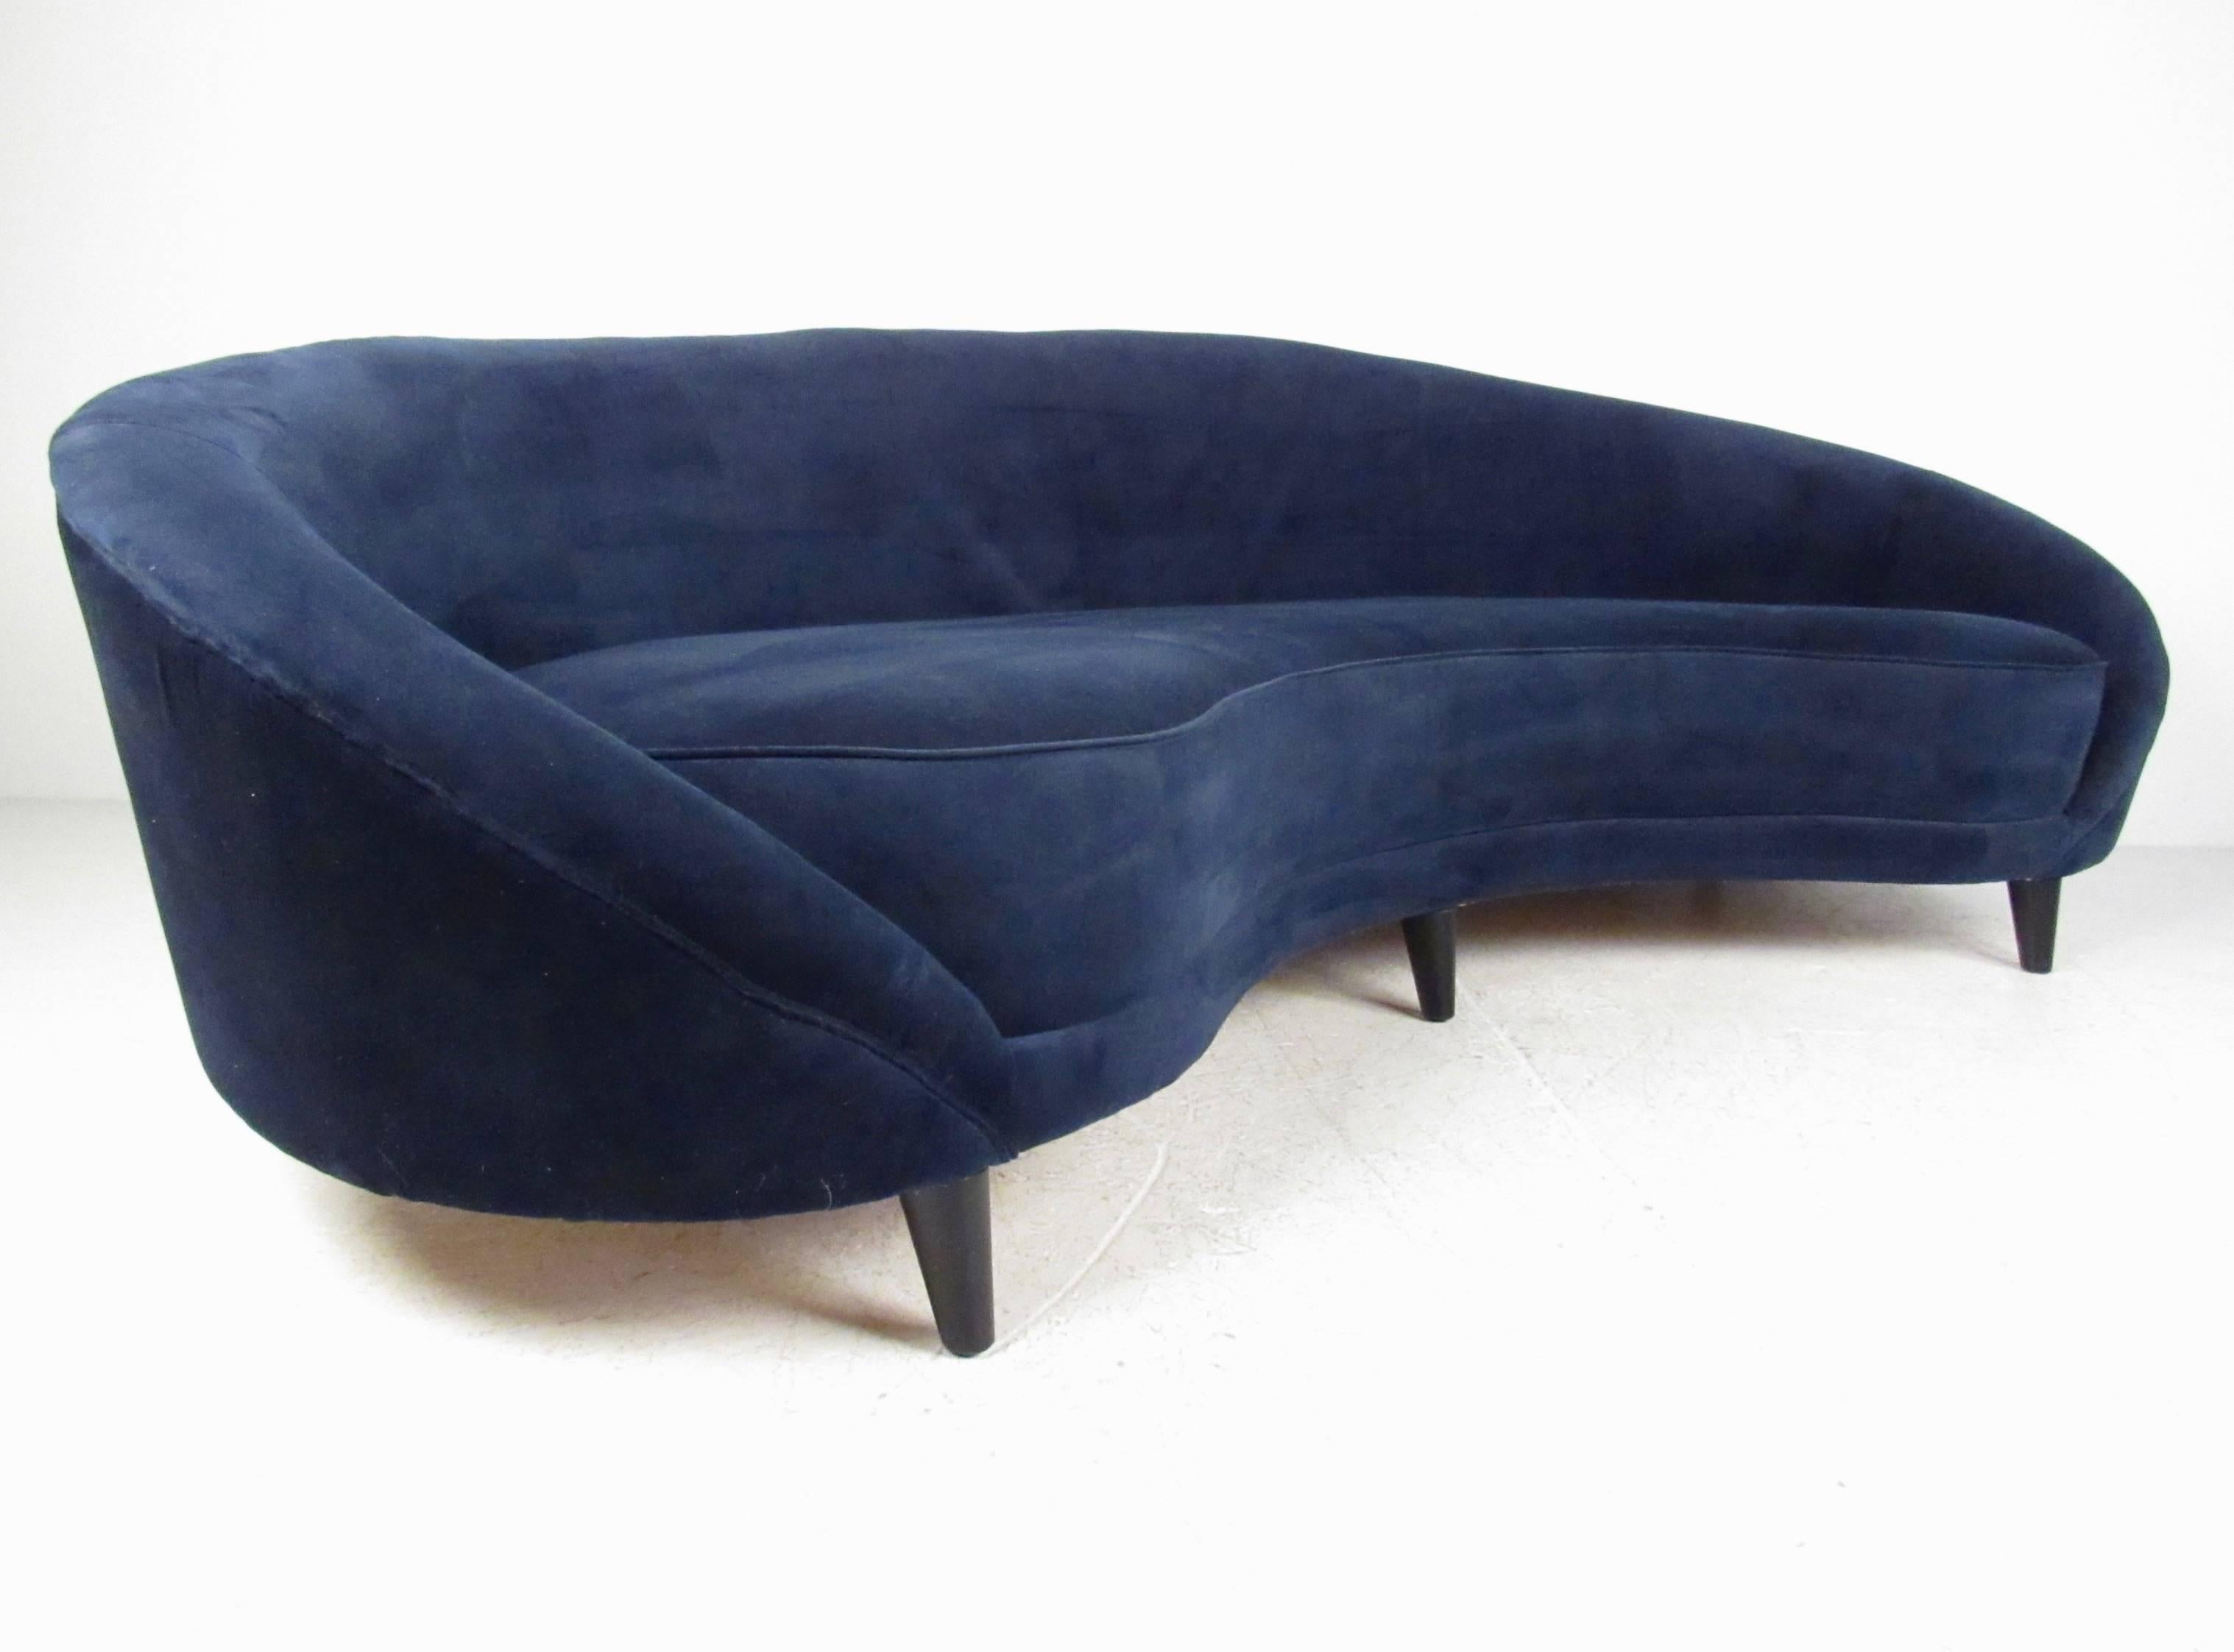 This modern rounded back sofa features comfortable upholstered design with six tapered legs for added support. The impressive size and shape of this beautiful sculpted sofa makes it a unique addition to any seating area. Please confirm item location